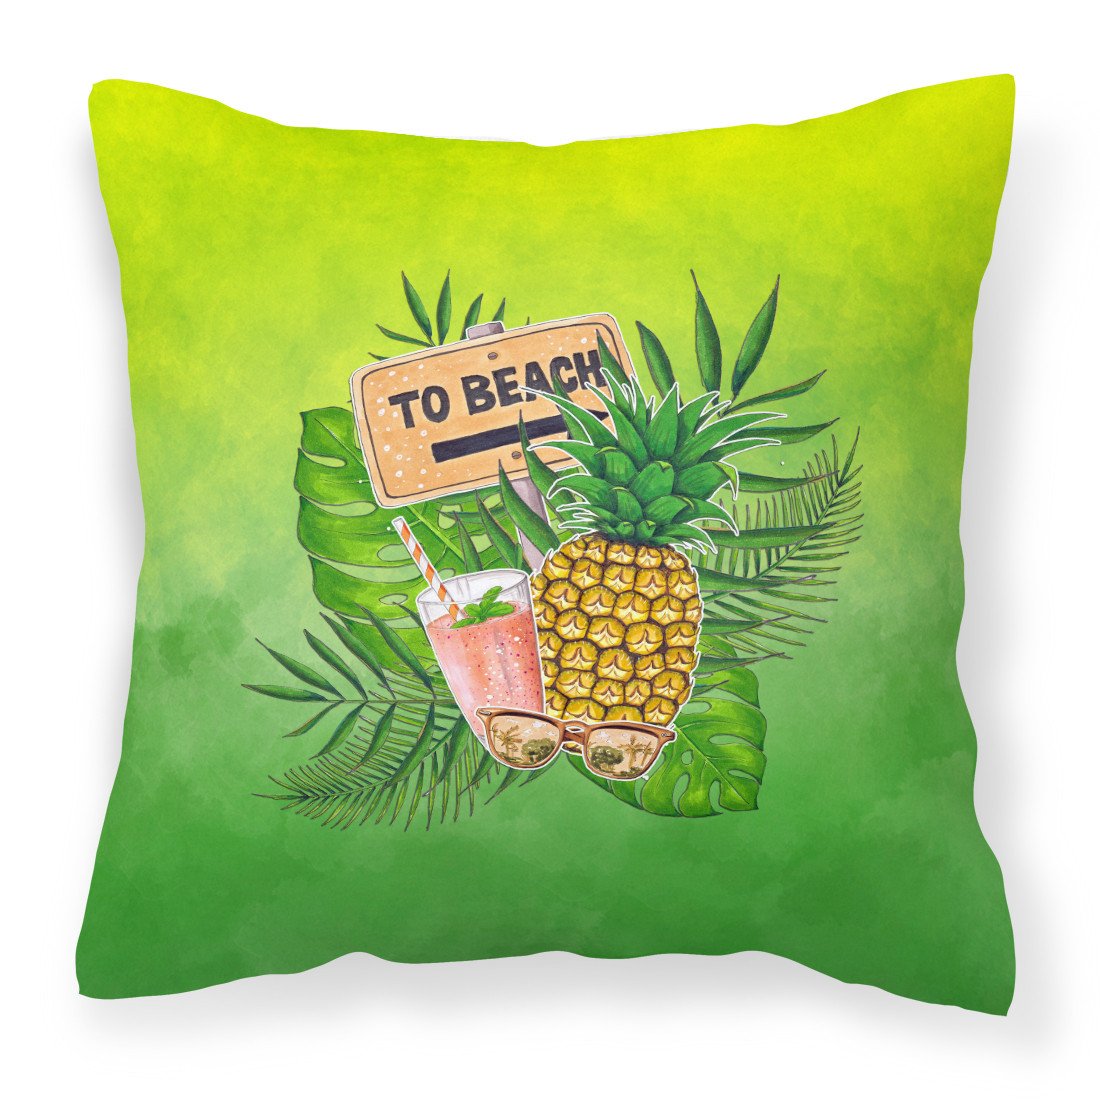 To the Beach Summer Fabric Decorative Pillow BB7450PW1818 by Caroline's Treasures